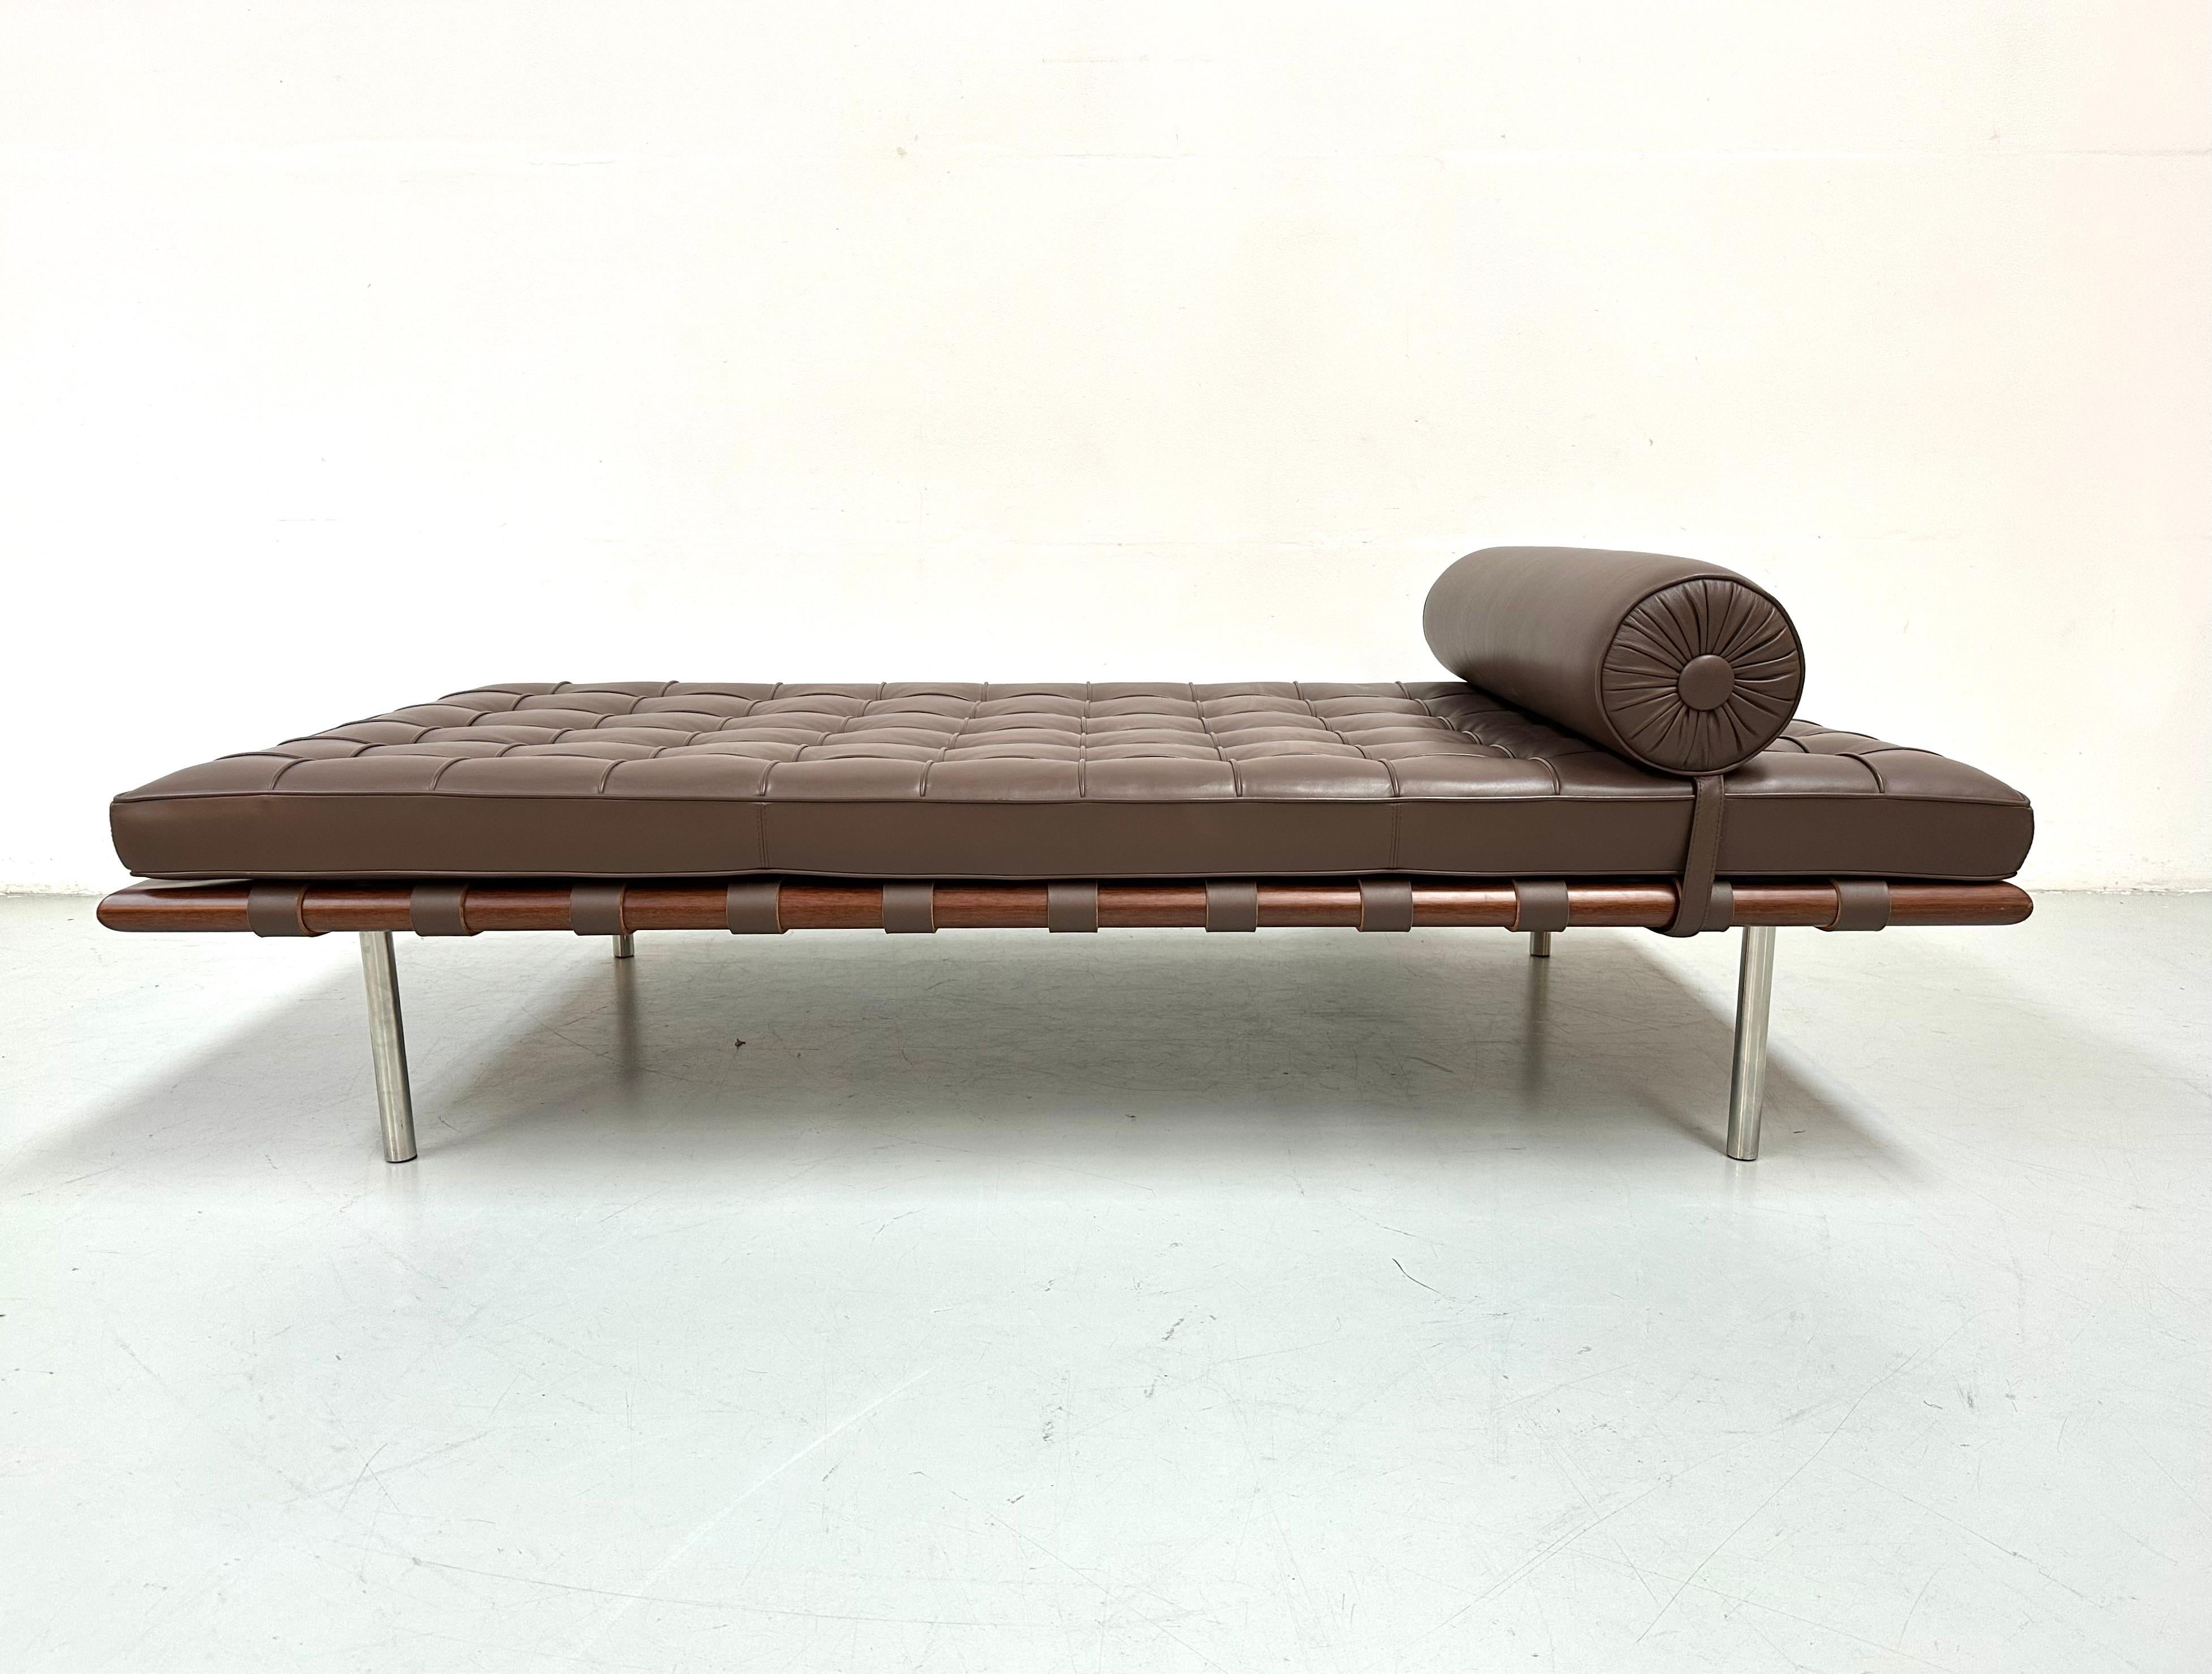 This iconic Knoll Studio Barcelona daybed was designed by Ludwig Mies van der Rohe in 1930. Just like the Barcelona chair, the daybed is characterized by a high degree of detail. Each of the 72 pockets is hand-hemmed and fitted with buttons, all